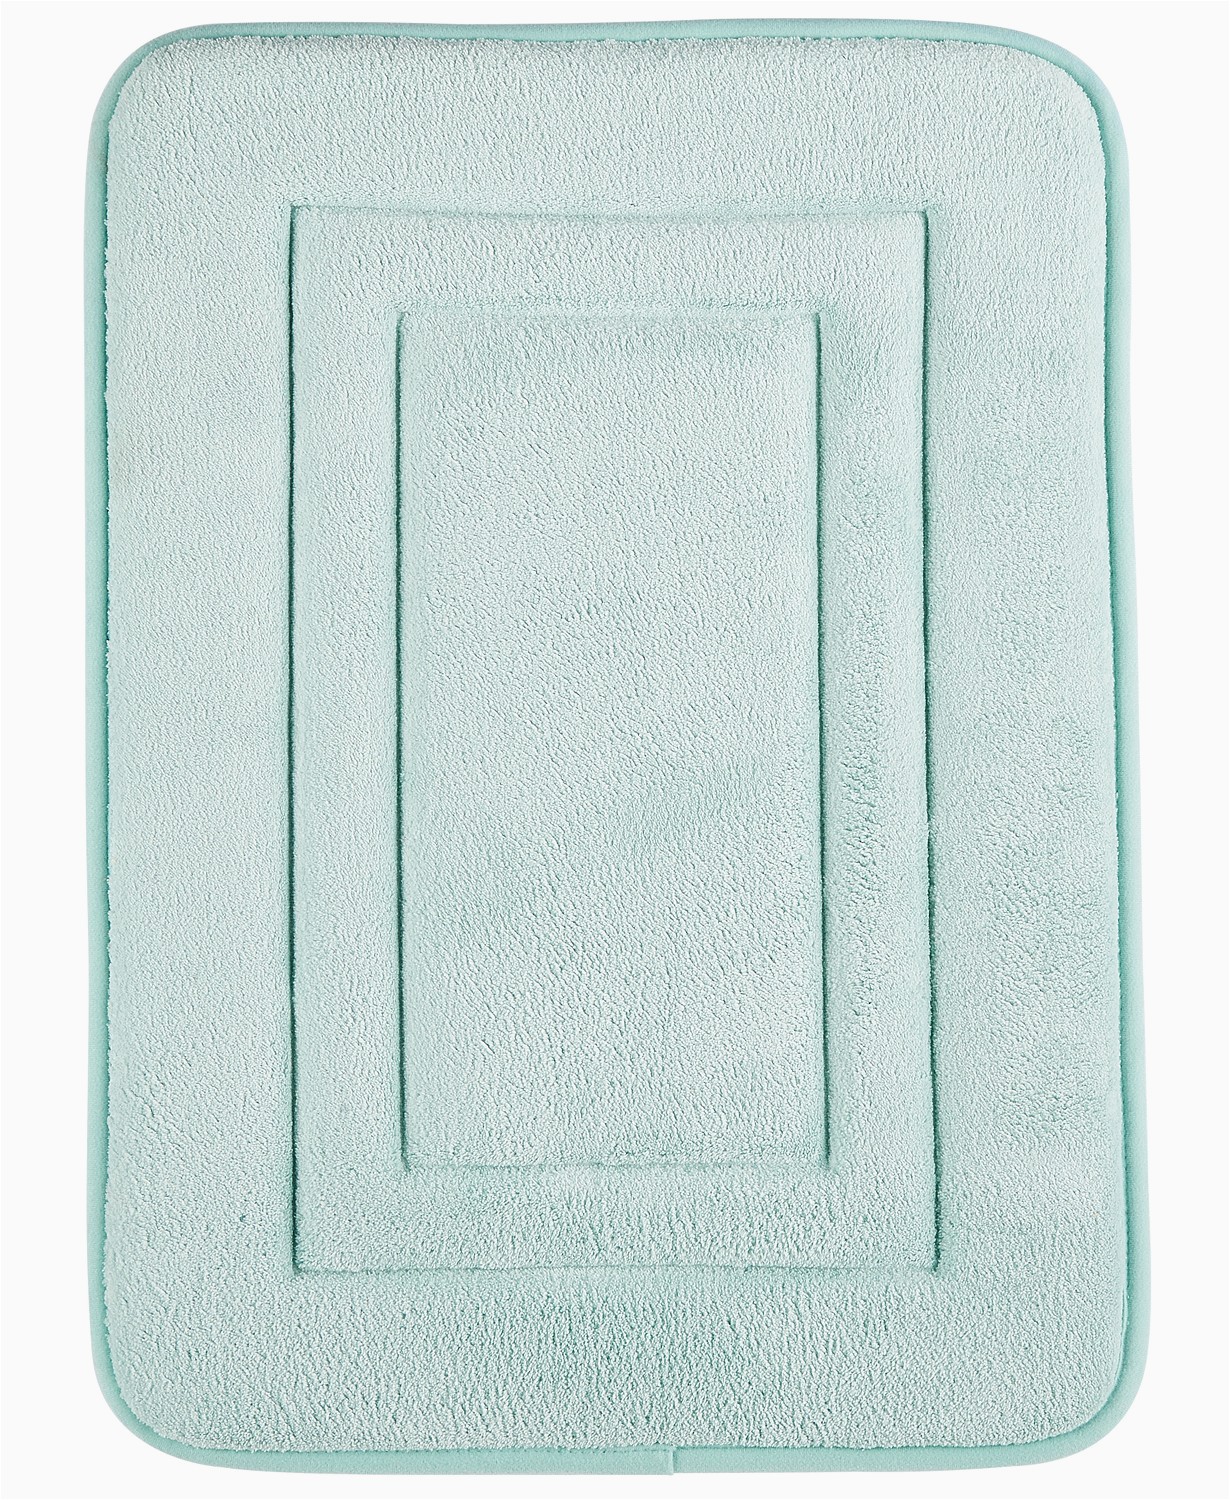 Sunham Home Fashions Bathroom Rugs Sunham Inspire Plus Bath Rug Features Unique 3d Fiber Structure Brings Stylish and Functional Flair to Your Décor 17 Inch by 24 Inch Spa Blue